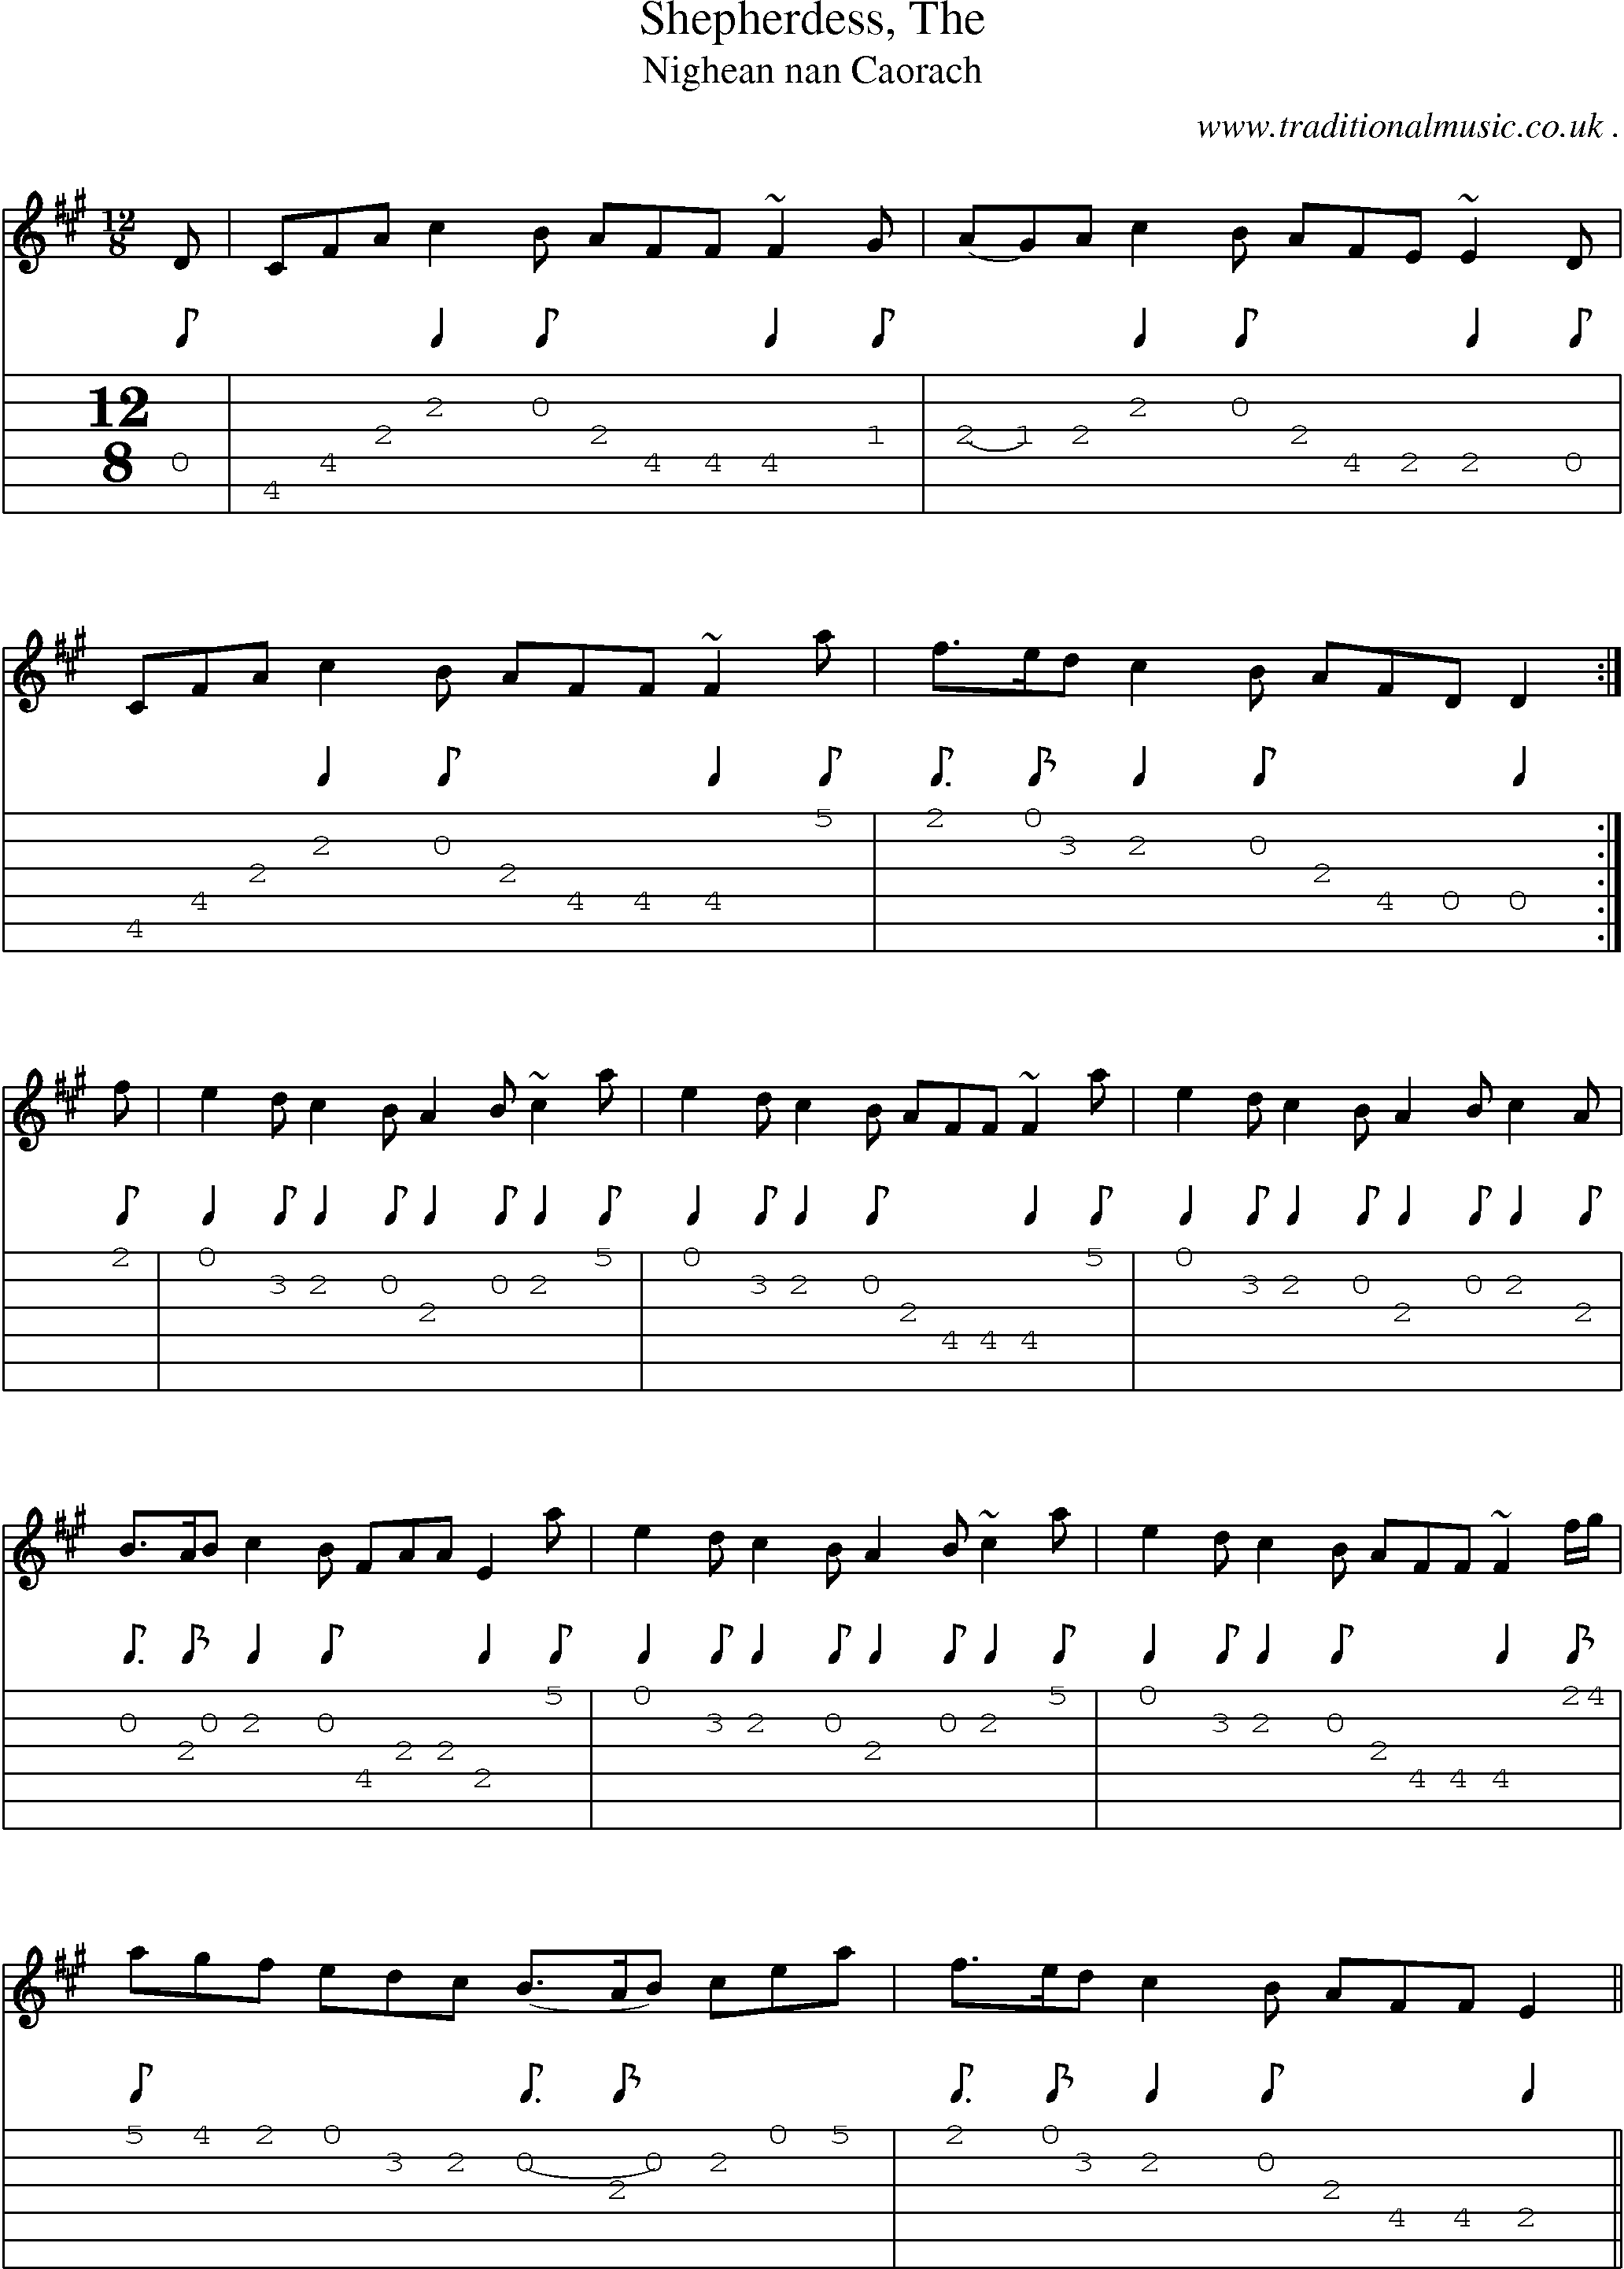 Sheet-music  score, Chords and Guitar Tabs for Shepherdess The